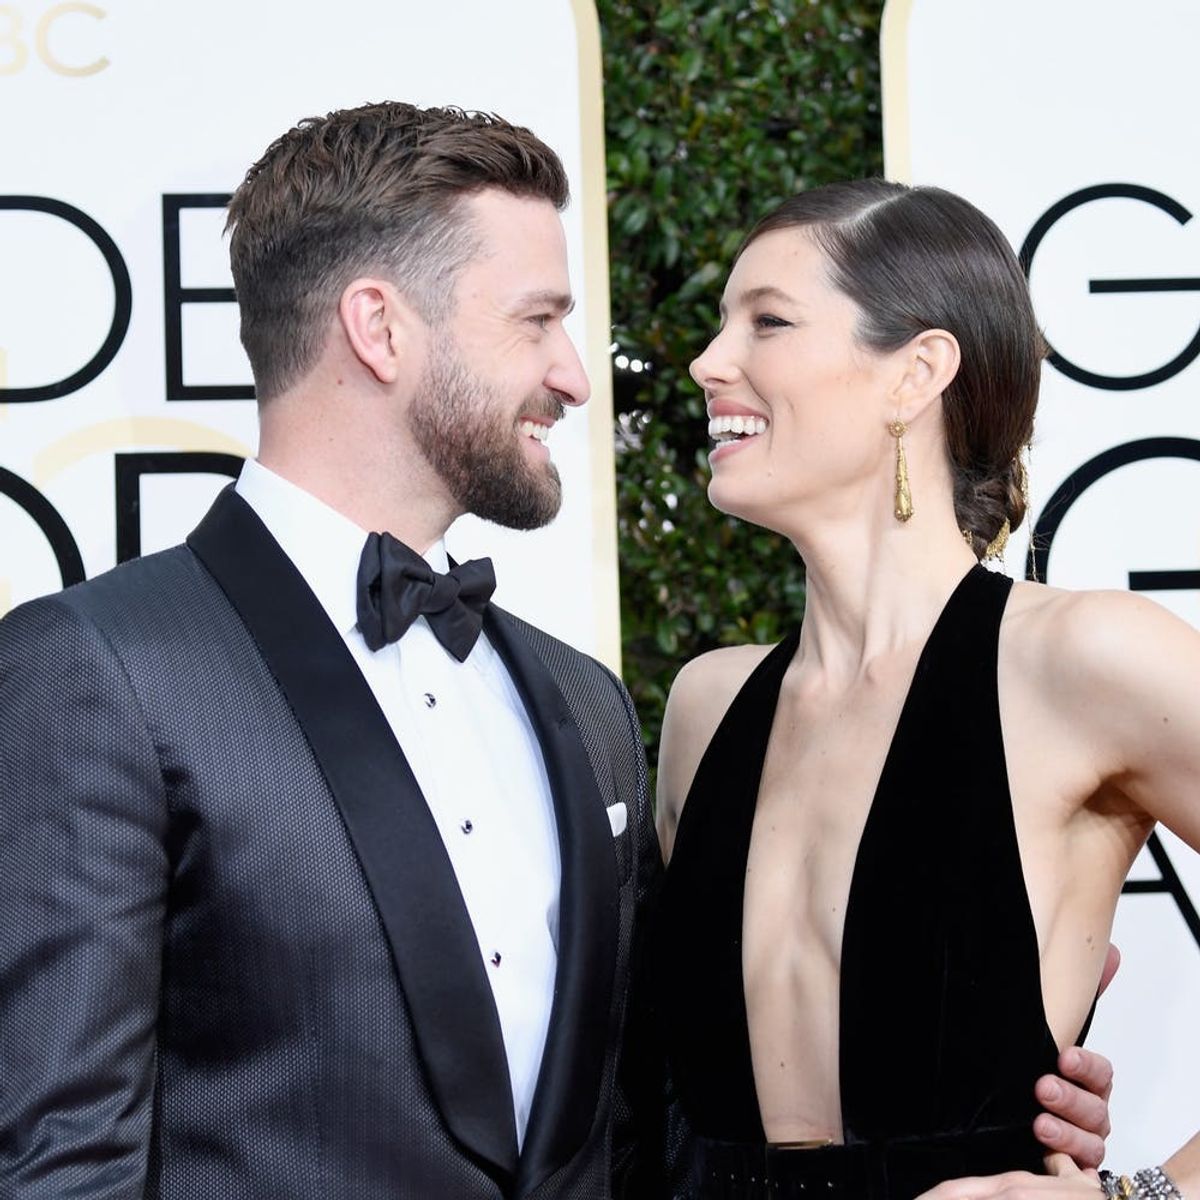 Justin Timberlake to Jessica Biel on Their 5th Anniversary: You Taught Me “What a True Love Means”